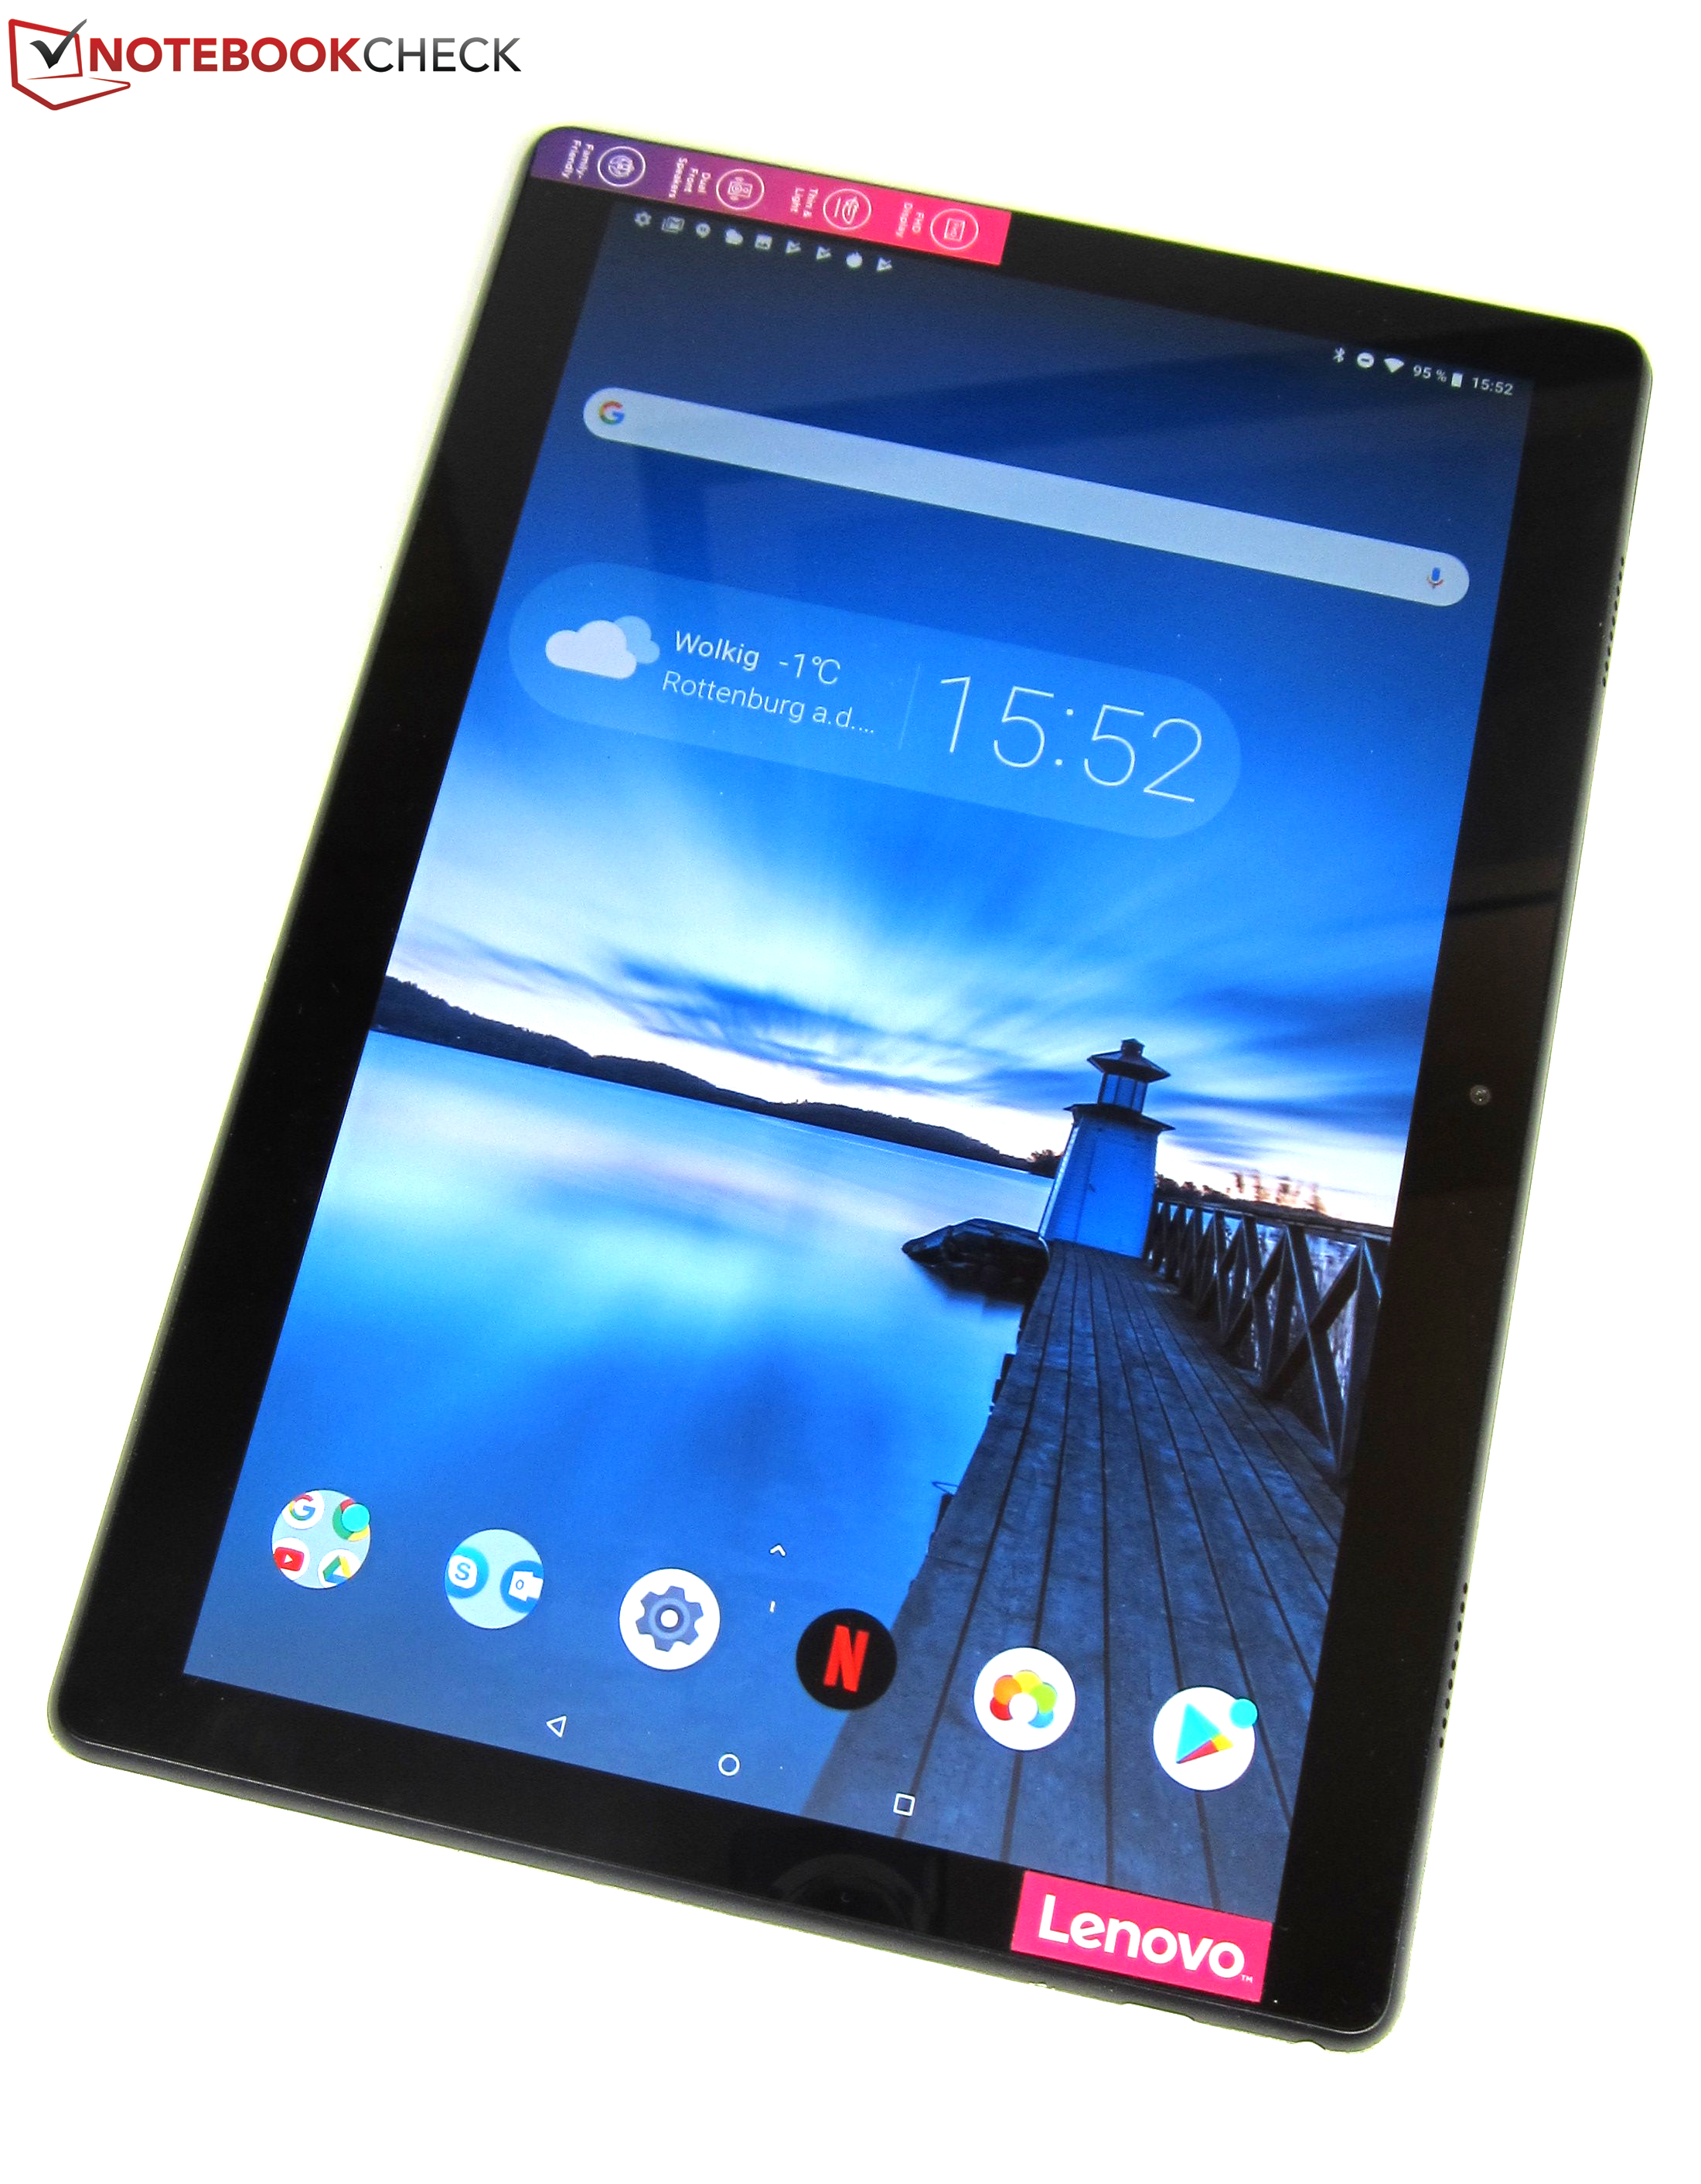 Lenovo Tab M10 Tablet Review - NotebookCheck.net Reviews